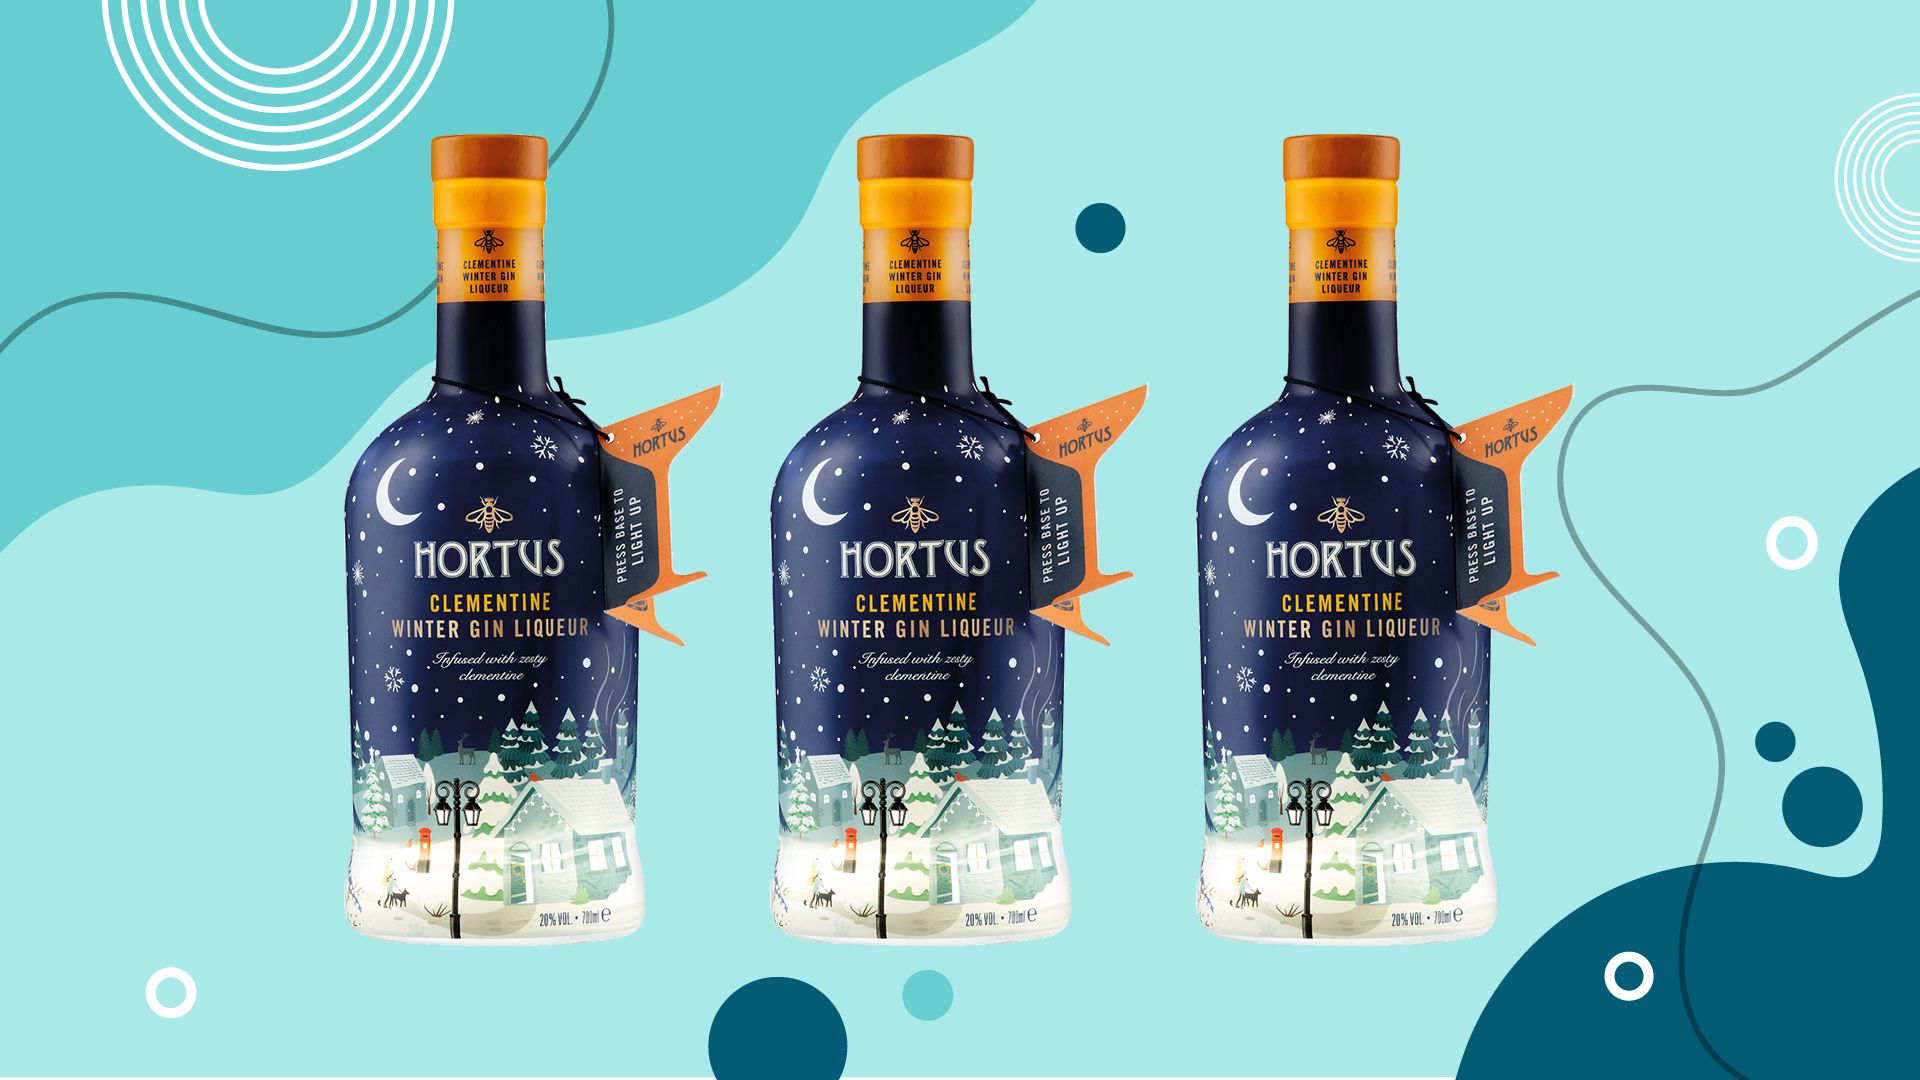 Lidl Launches A Light-Up Gin For Christmas